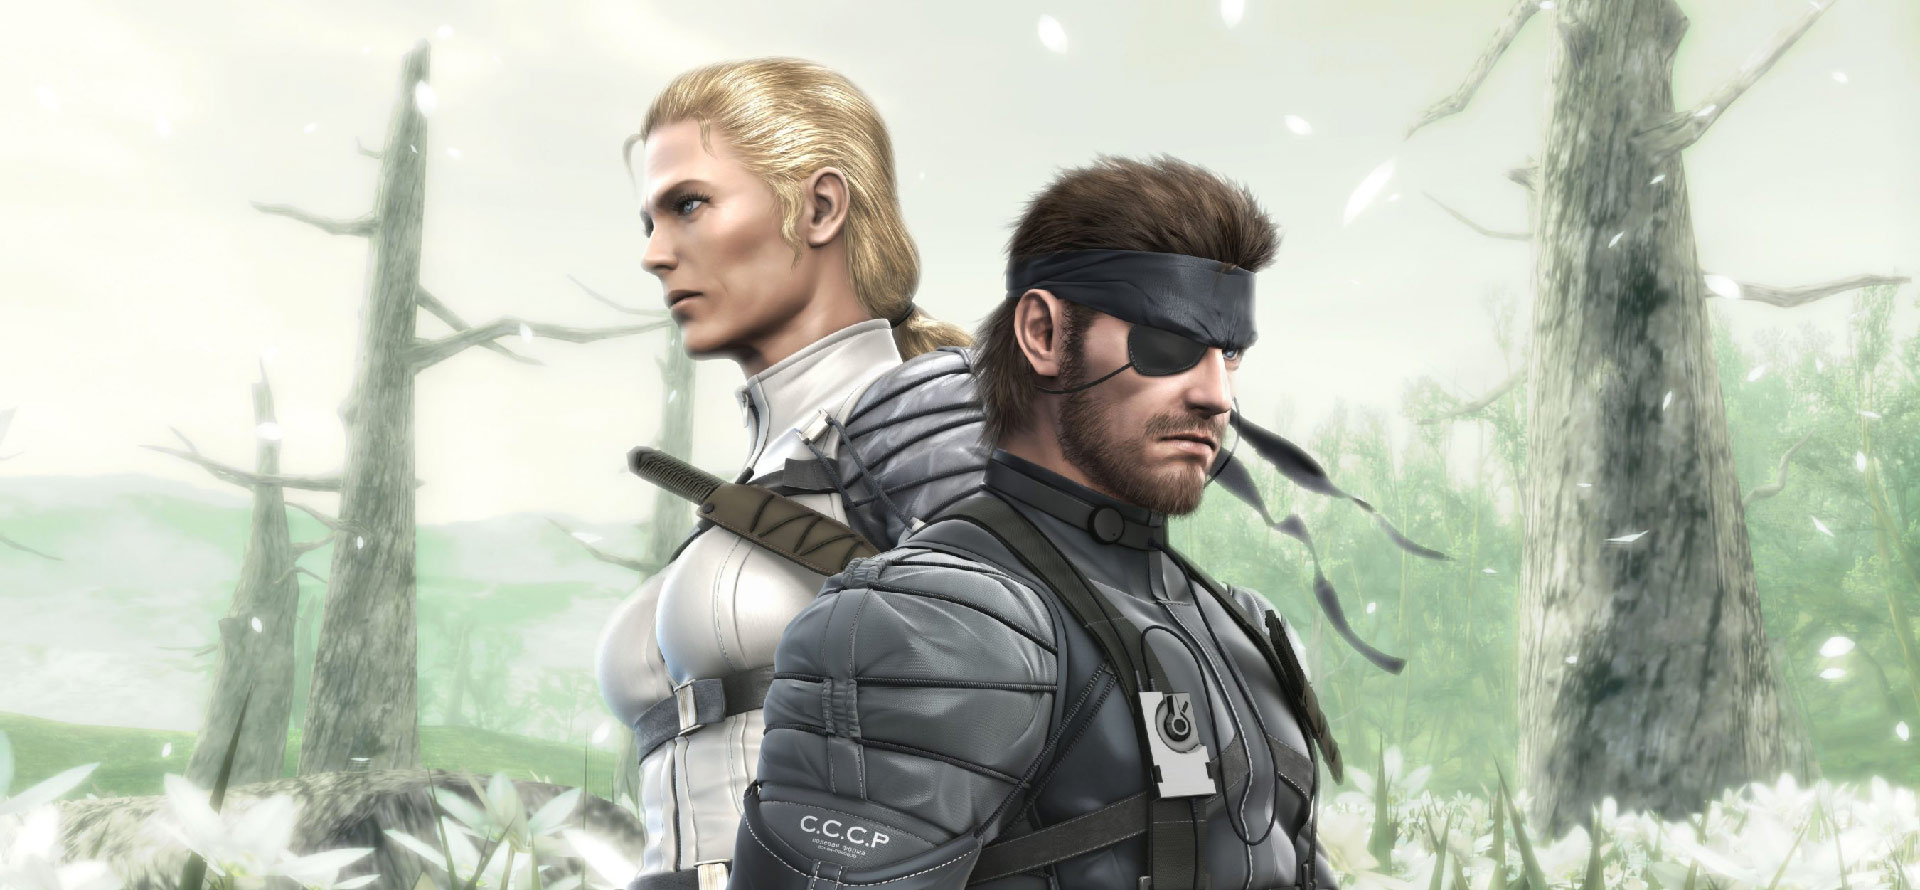 The Boss - METAL GEAR SOLID 3: Snake Eater